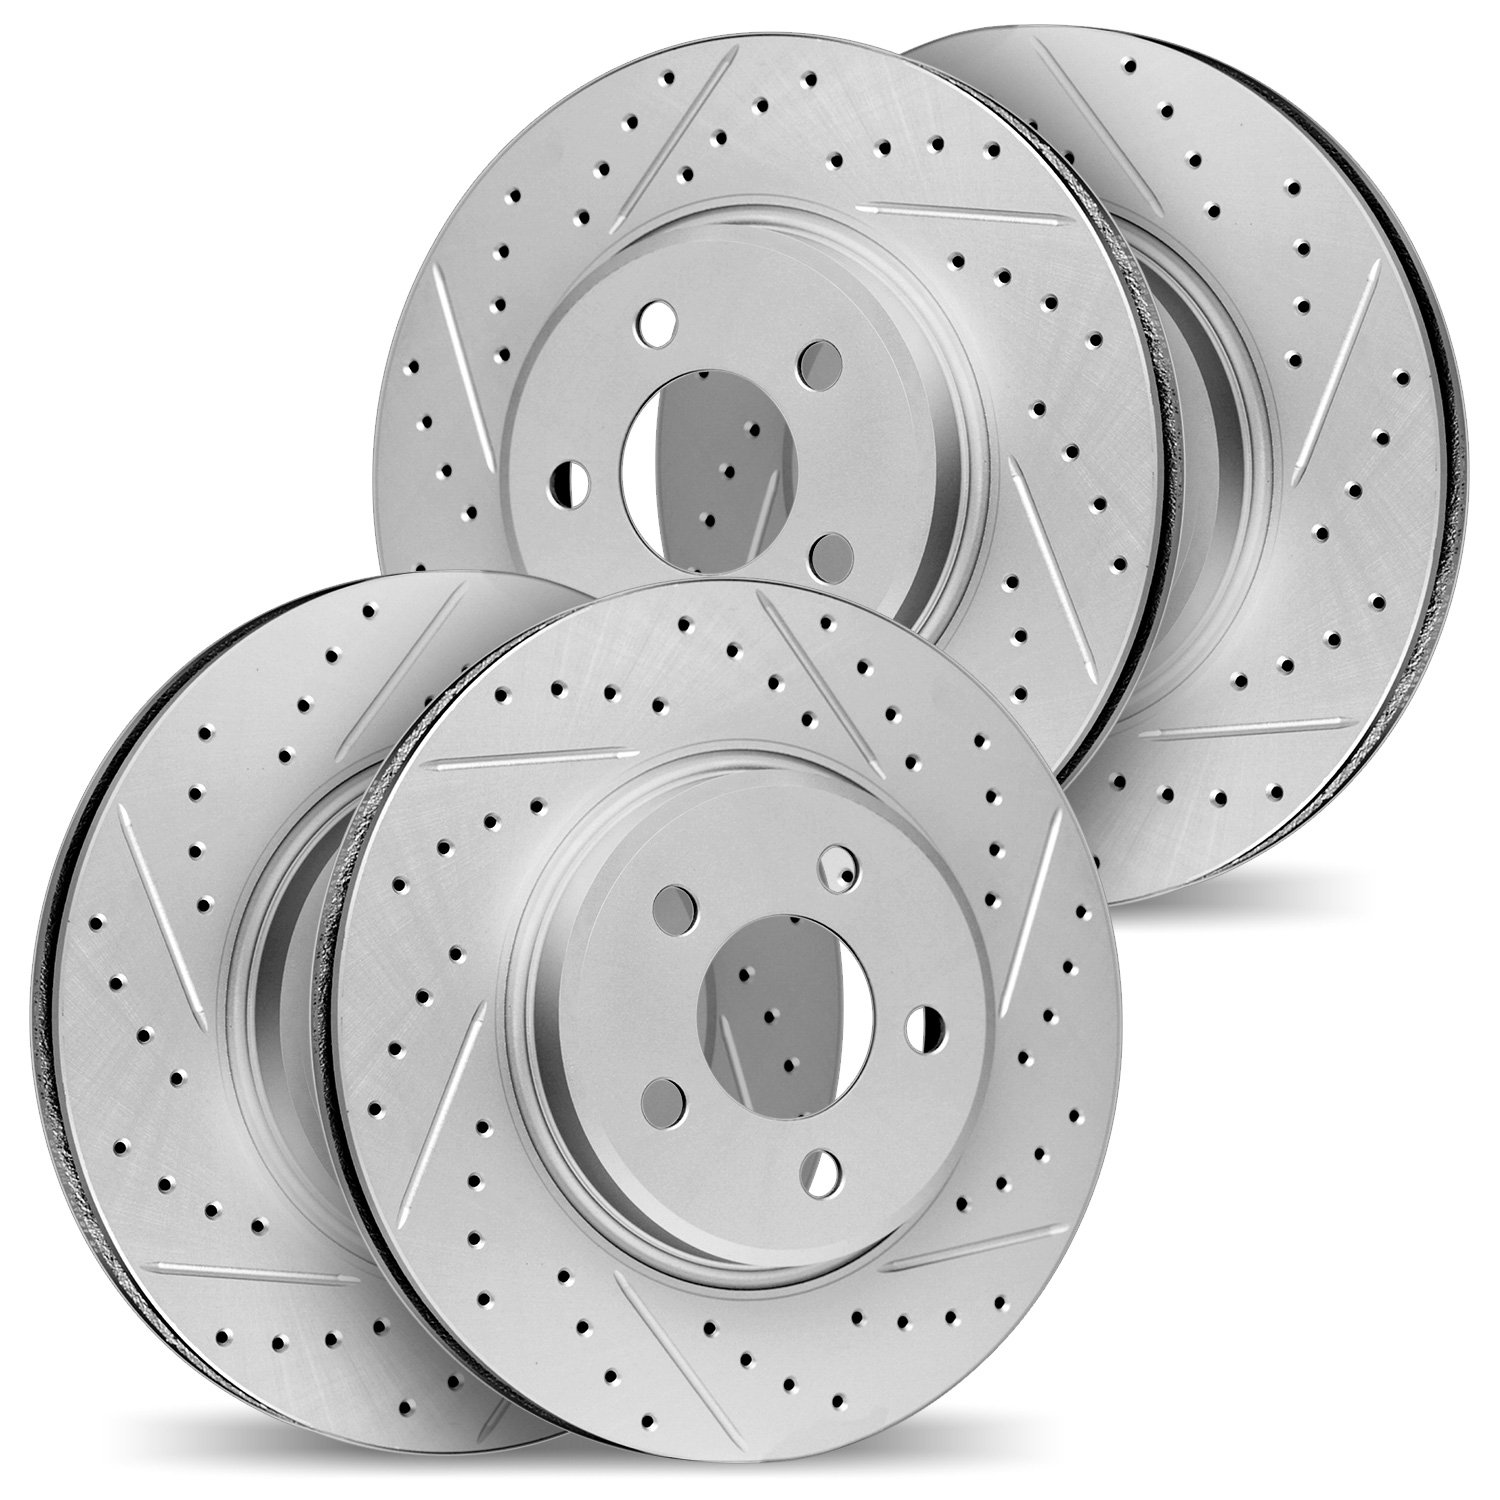 2004-72025 Geoperformance Drilled/Slotted Brake Rotors, 2003-2006 Mitsubishi, Position: Front and Rear